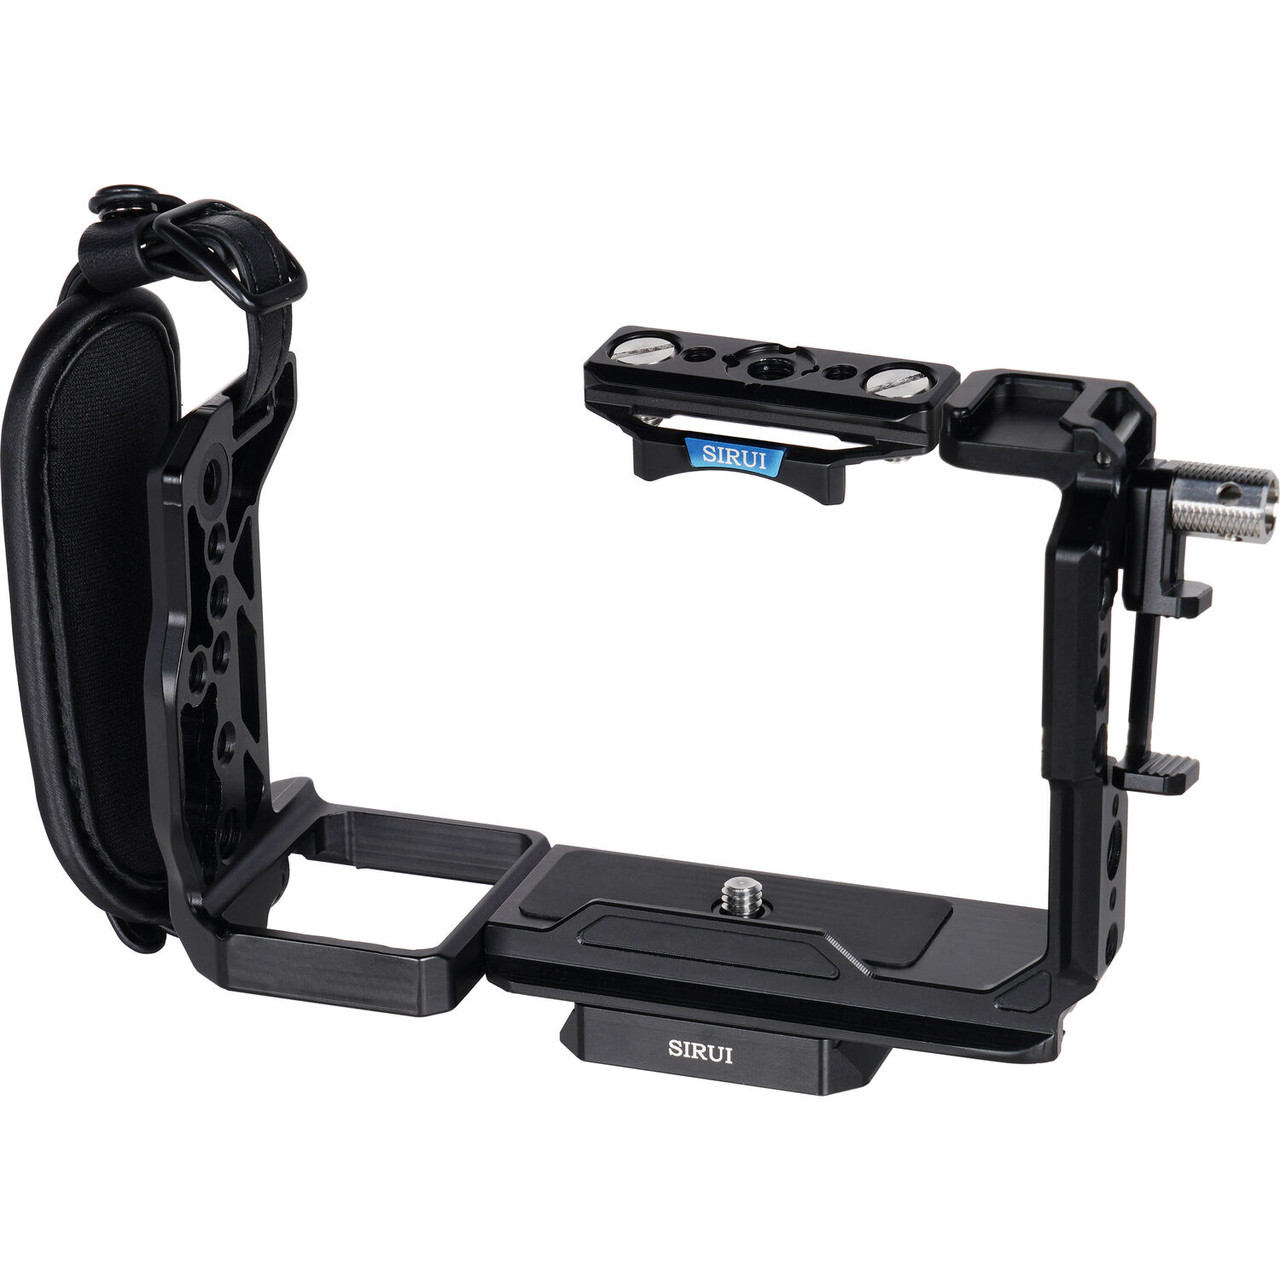 Accessory System for Sony FX3/FX30